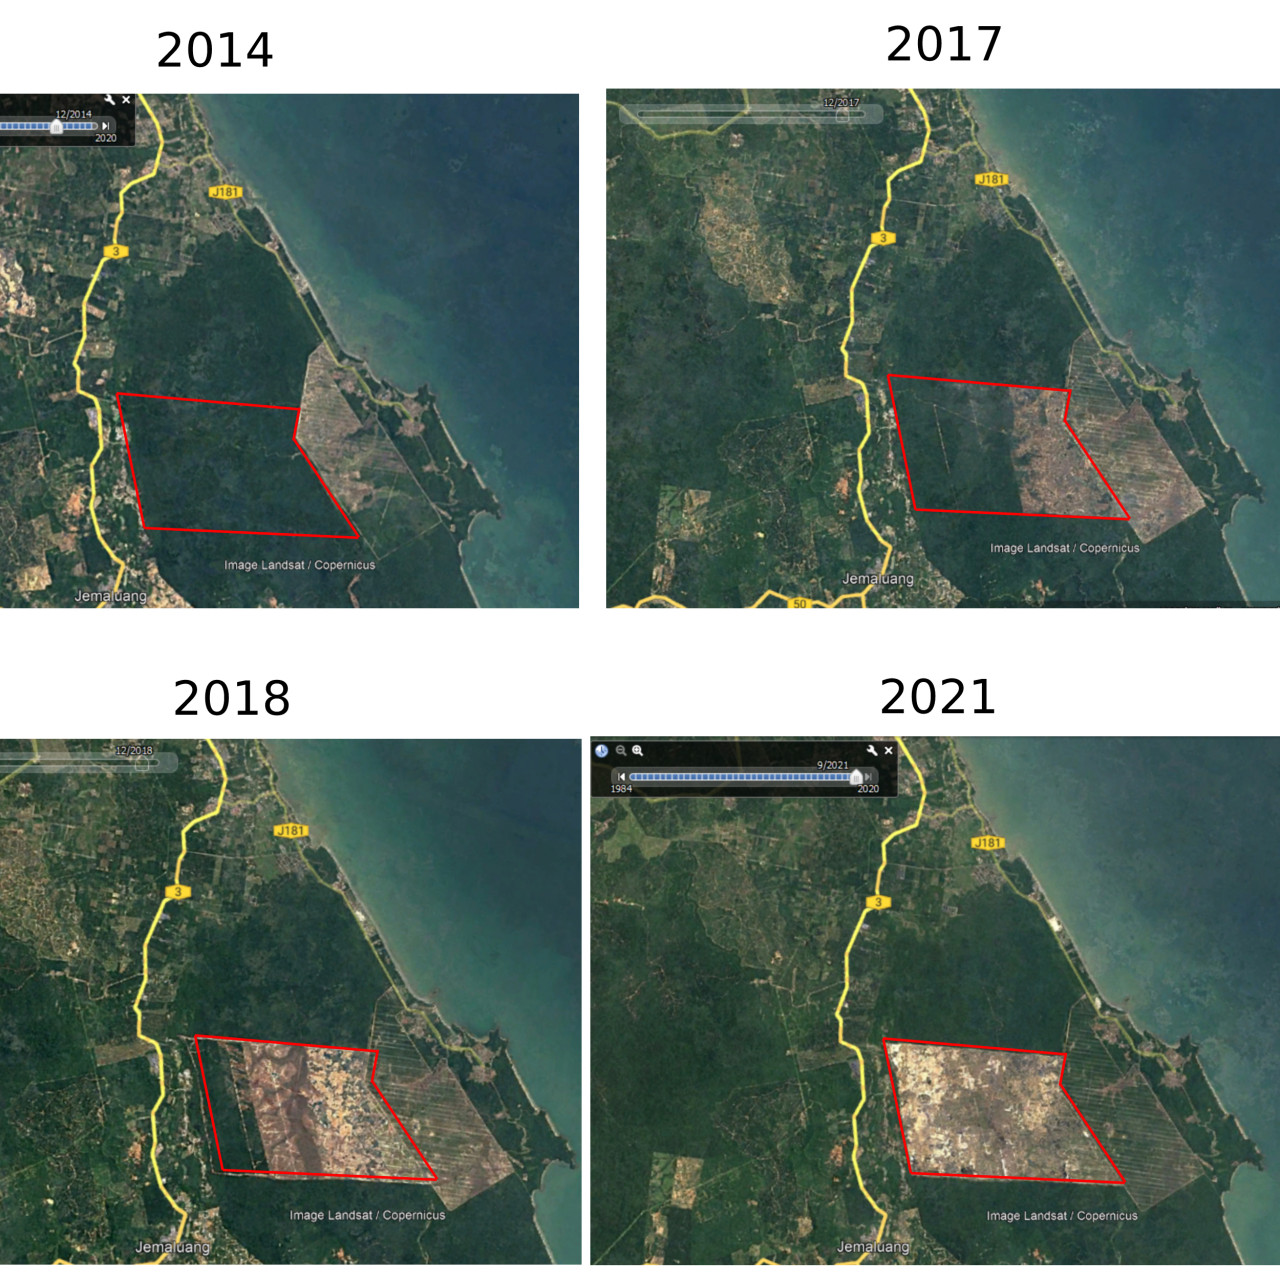 According to Macaranga.org, the land was no longer listed on the Johor Forestry Department reports from 2015 to 2019, suggesting that the exercise occurred in 2014. – The Vibes file pic, September 29, 2021